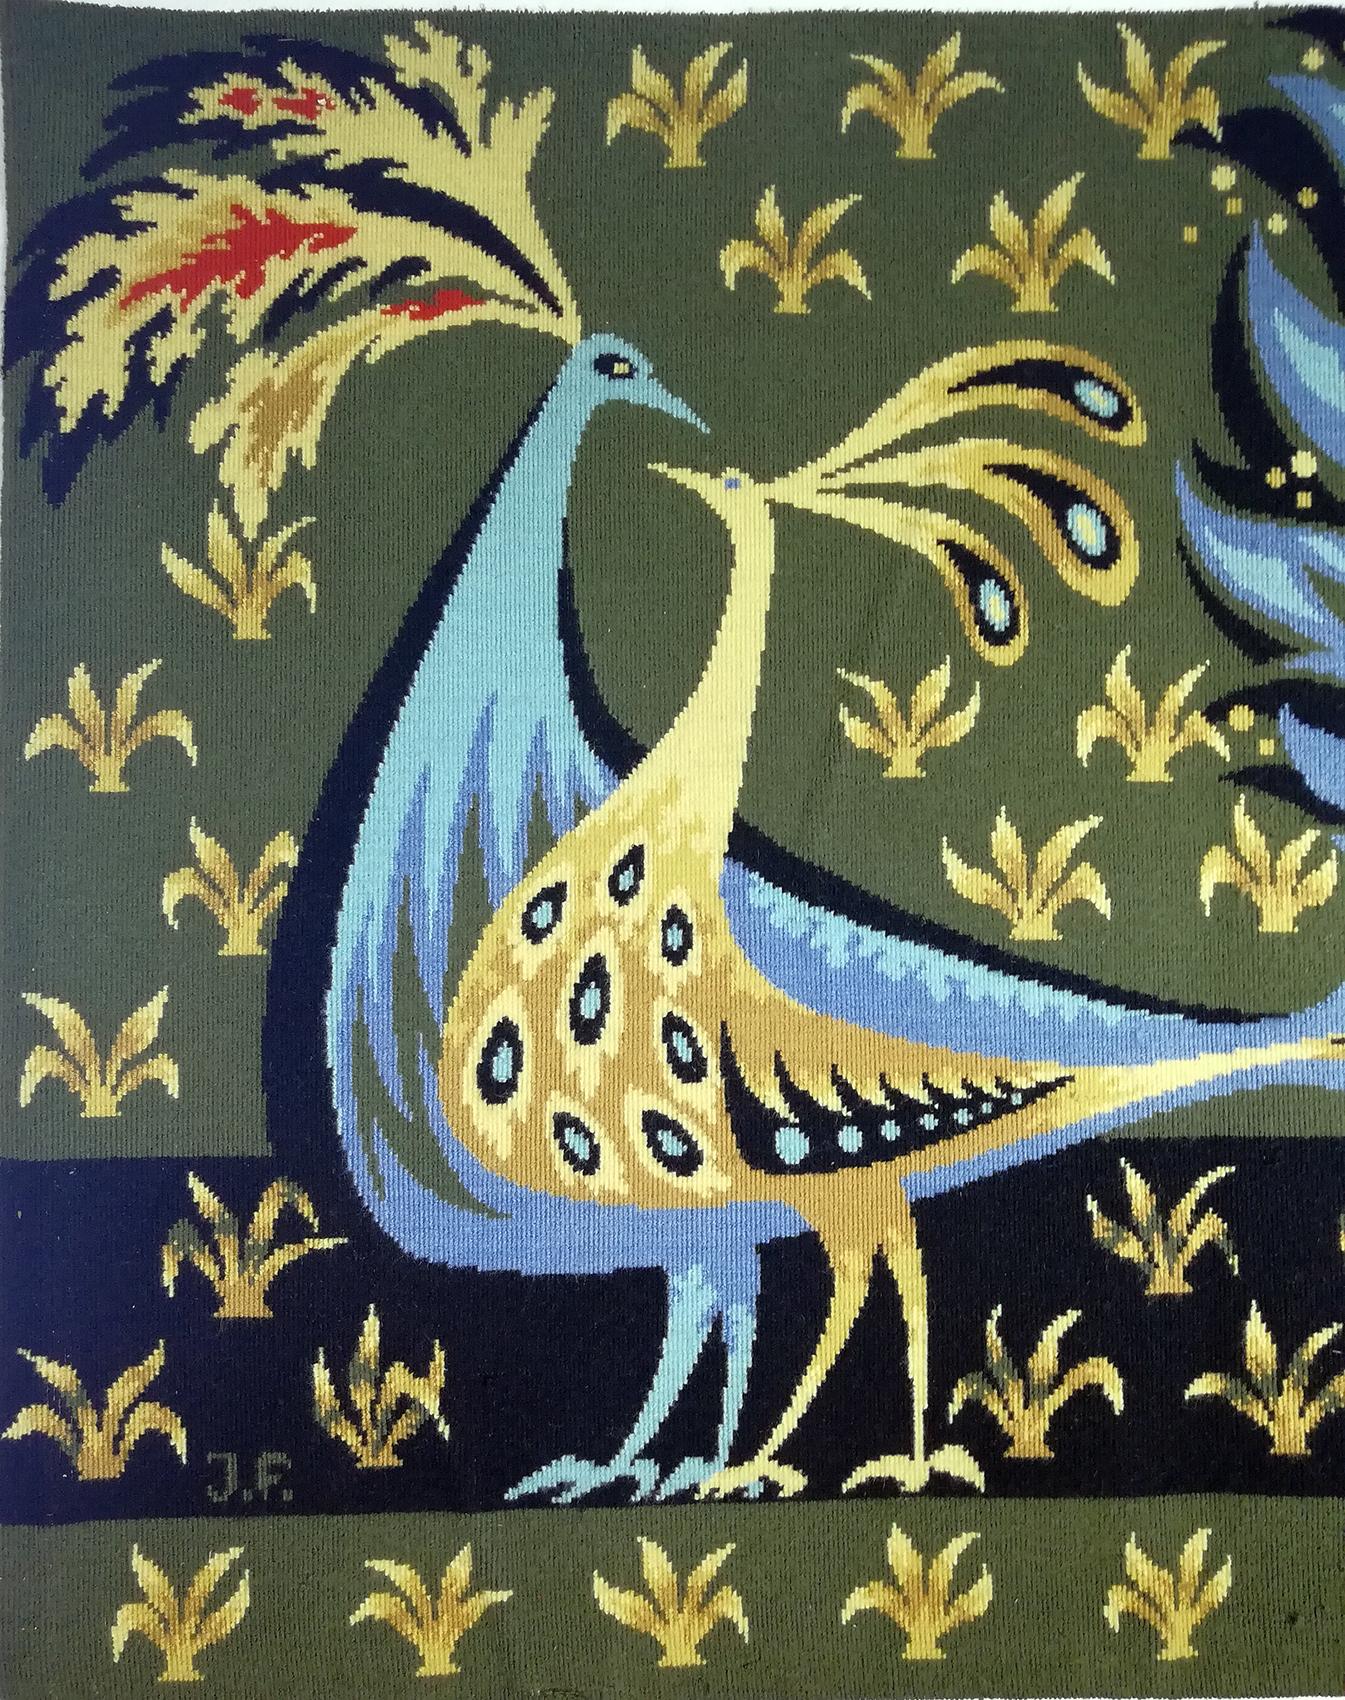 Modernist wall tapestry signed Claude Bleynie.
Entitled “Bouquet d’oiseaux bleus”.
Depicting a decorative scene of flowers with two elegant and stylized peacocks.
Woven wool, style Jacquard machine “point princesse” in the style of Jean